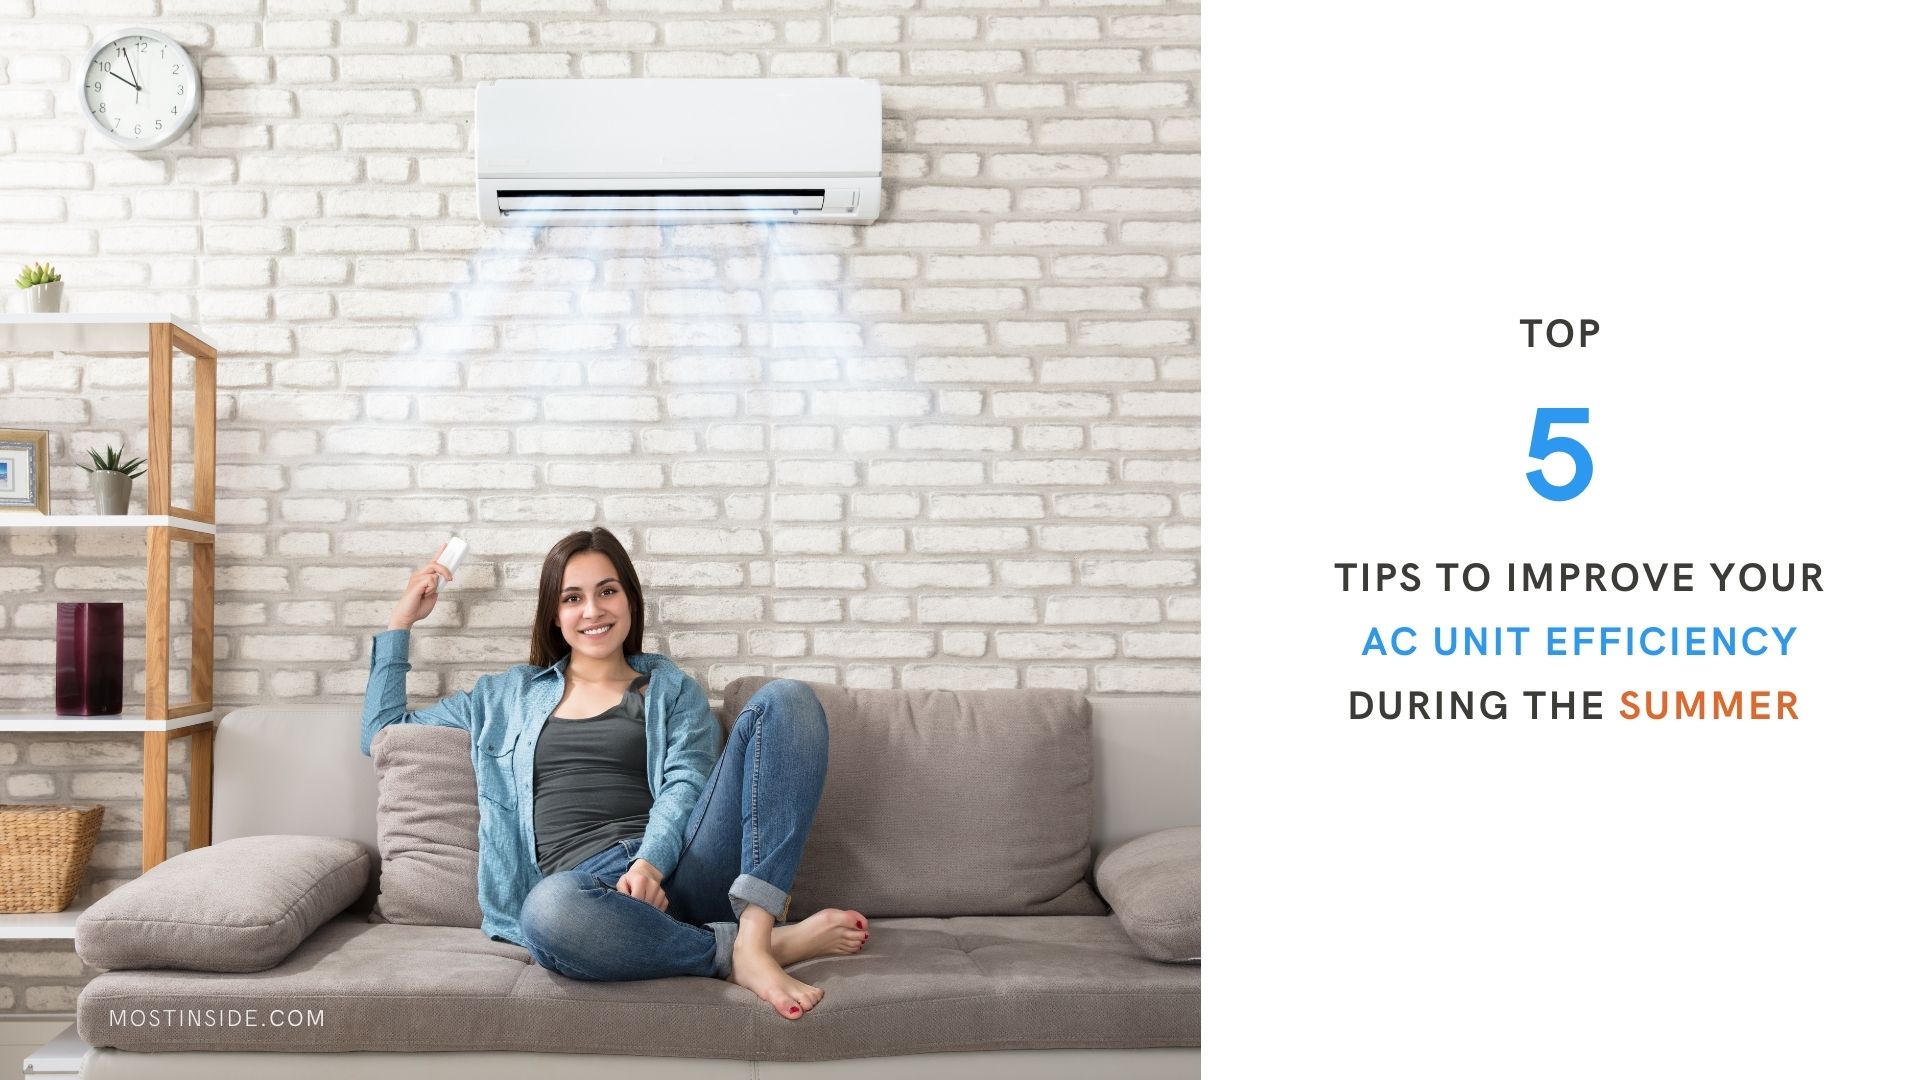 How to Improve AC Unit Efficiency During the Summer 